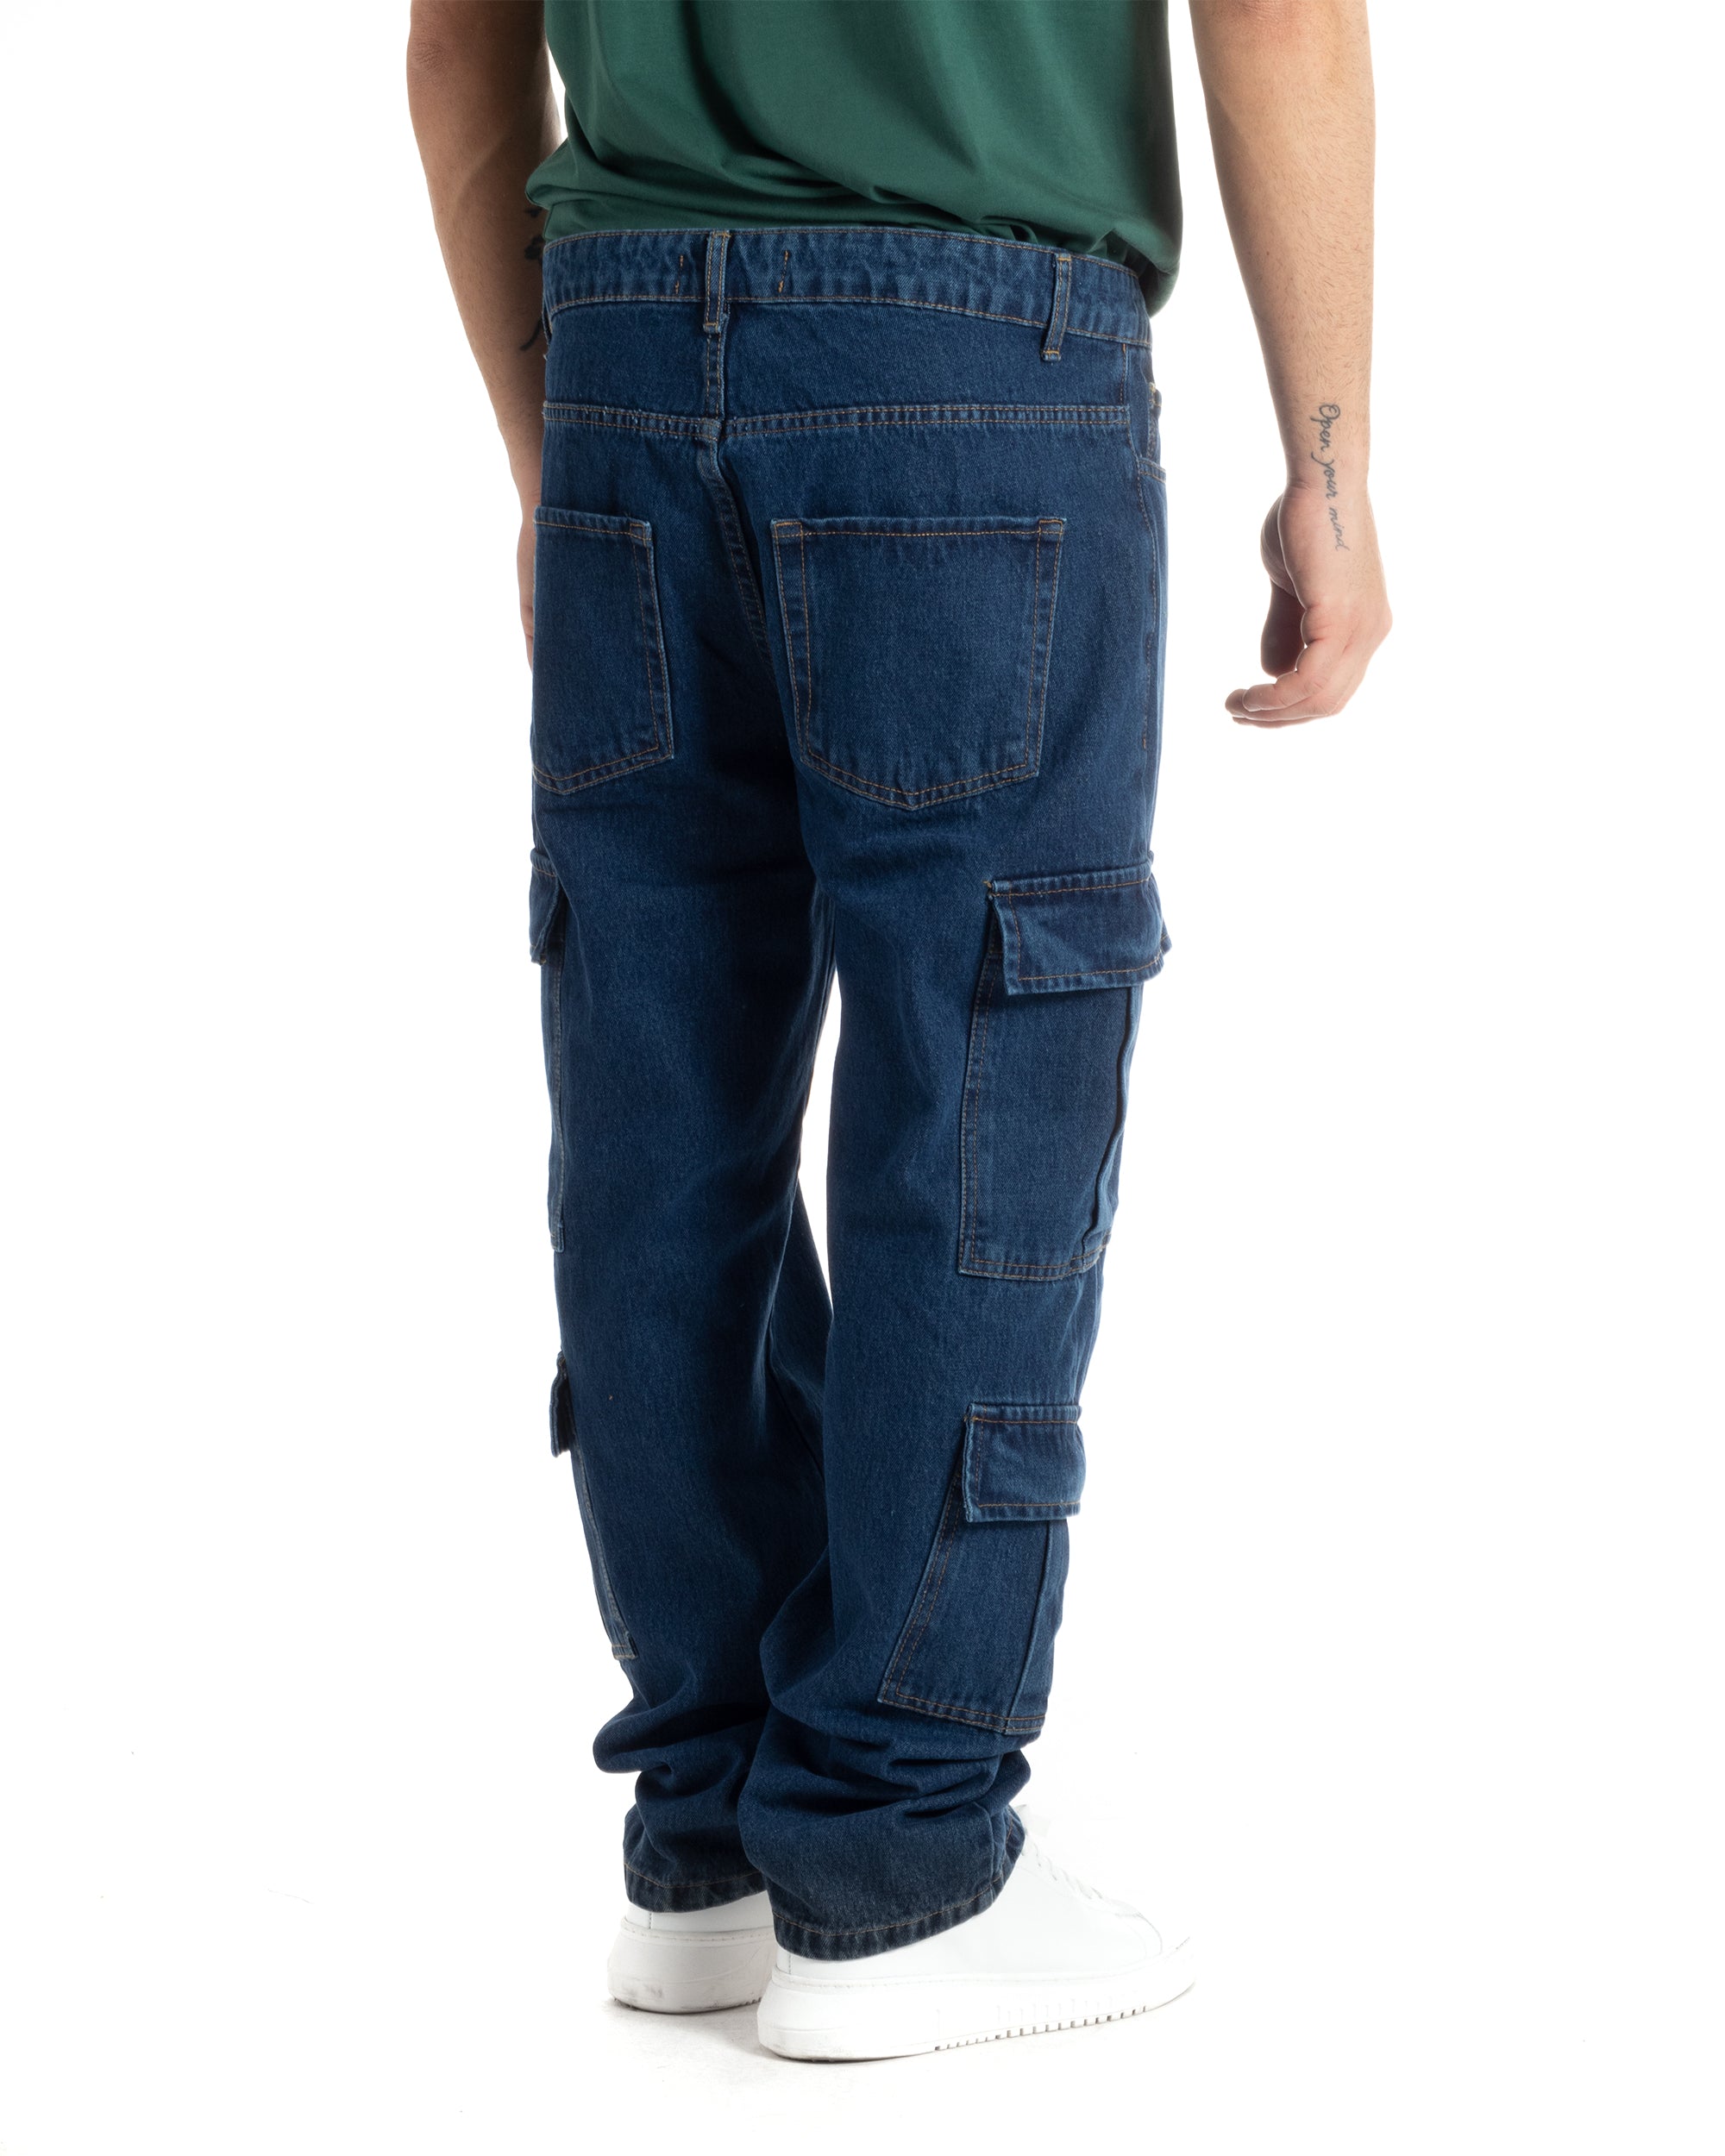 Men's Jeans Cargo Straight Fit Light Denim Casual Pants GIOSAL-P5668A